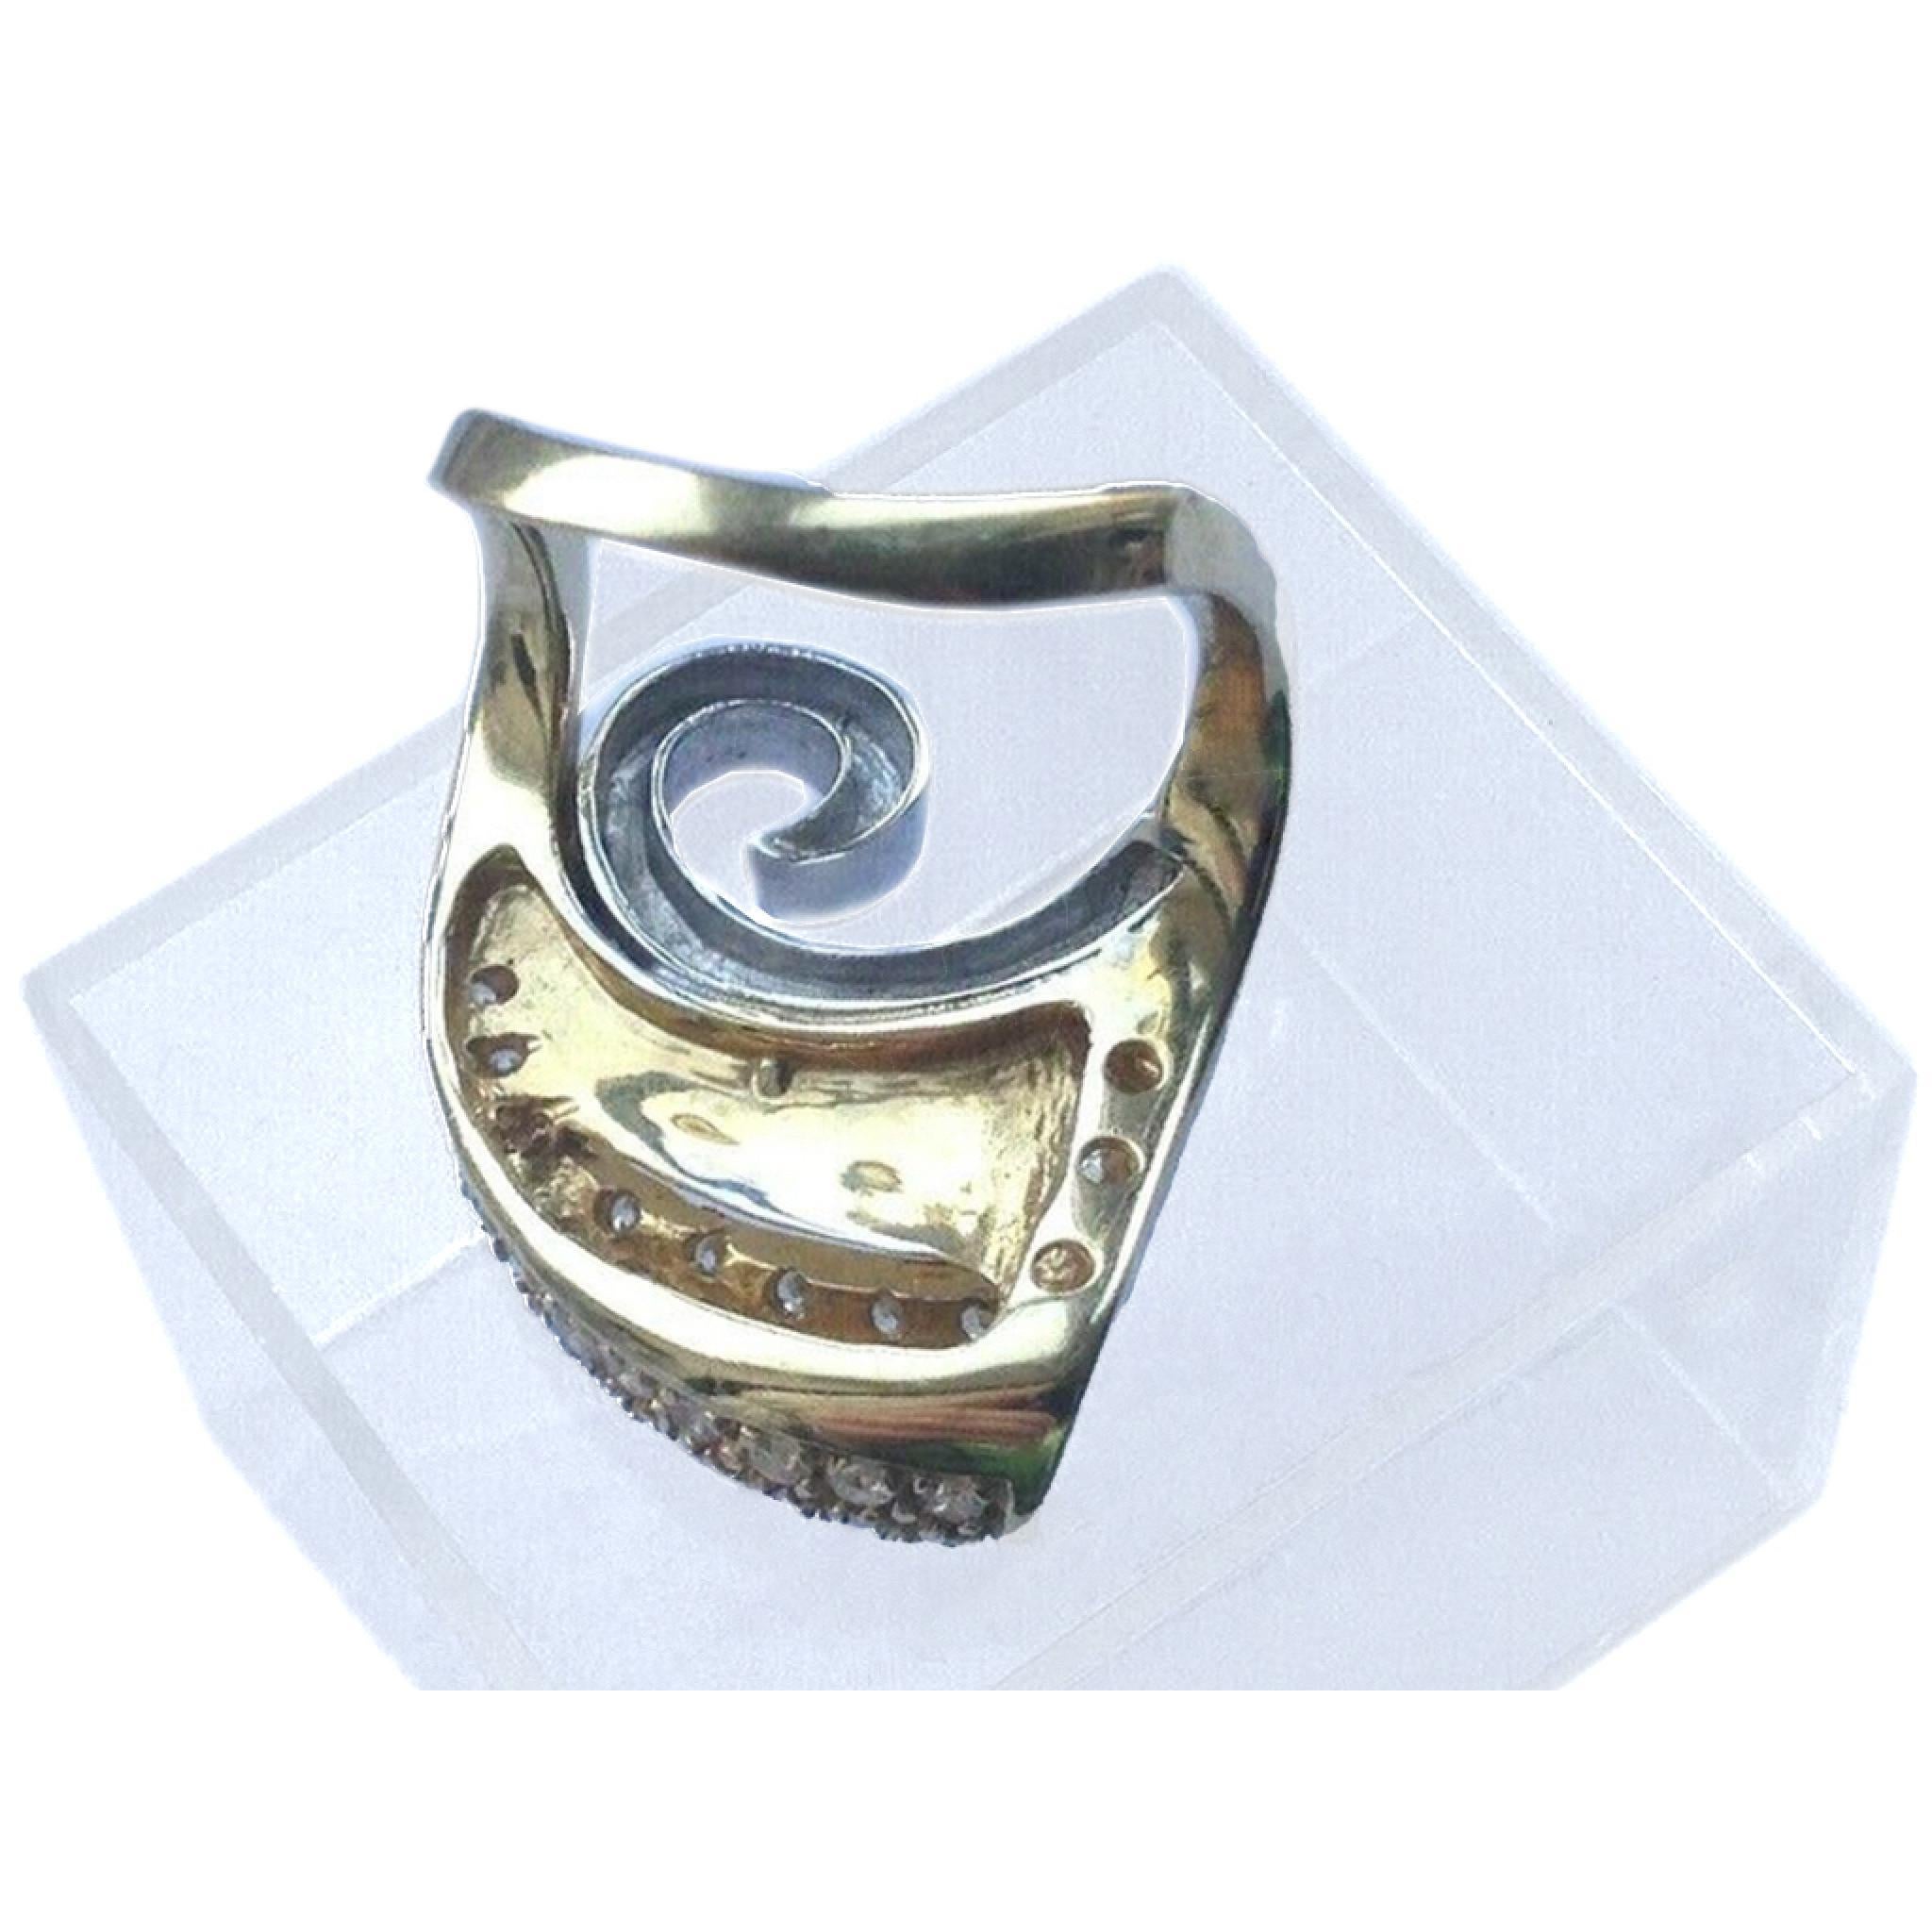 14ct 585 Gold Contemporary Statement Ring
White and Yellow Gold
Dated 1980s
This Contemporary beautiful ring is 
Set with 35 x Clear unknown Gem Stones 
Fully Hallmarked 